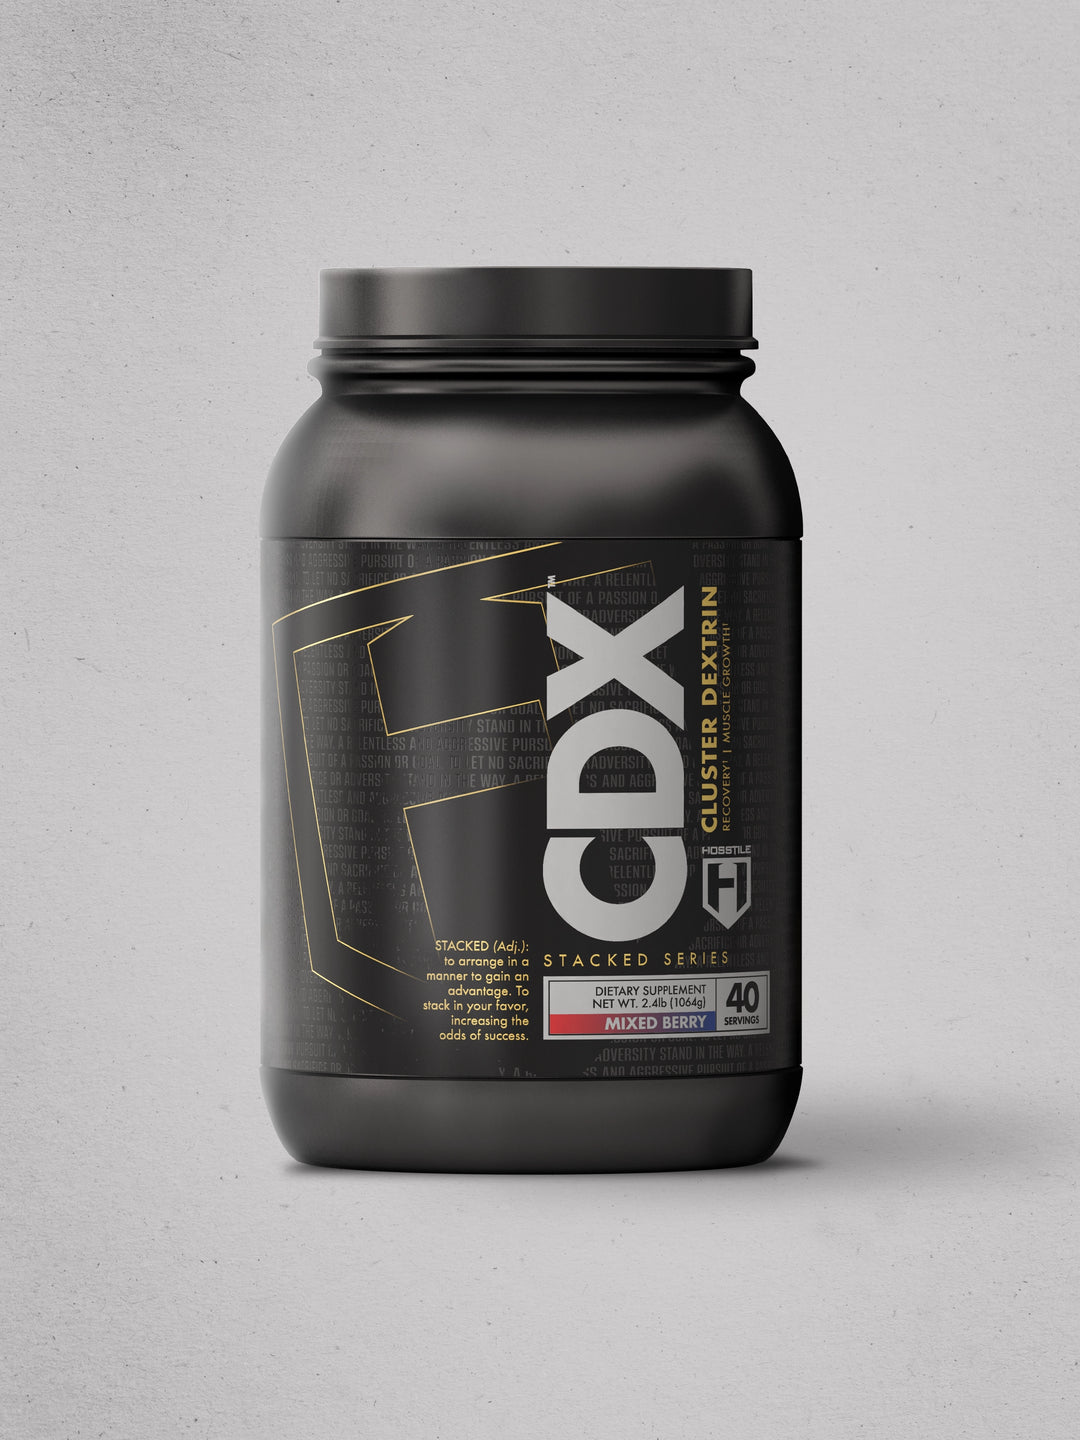 Hosstile CDX Cluster Dextrin Highly Branched Cyclic Dextrin Mixed Berry#flavor_mixed-berry